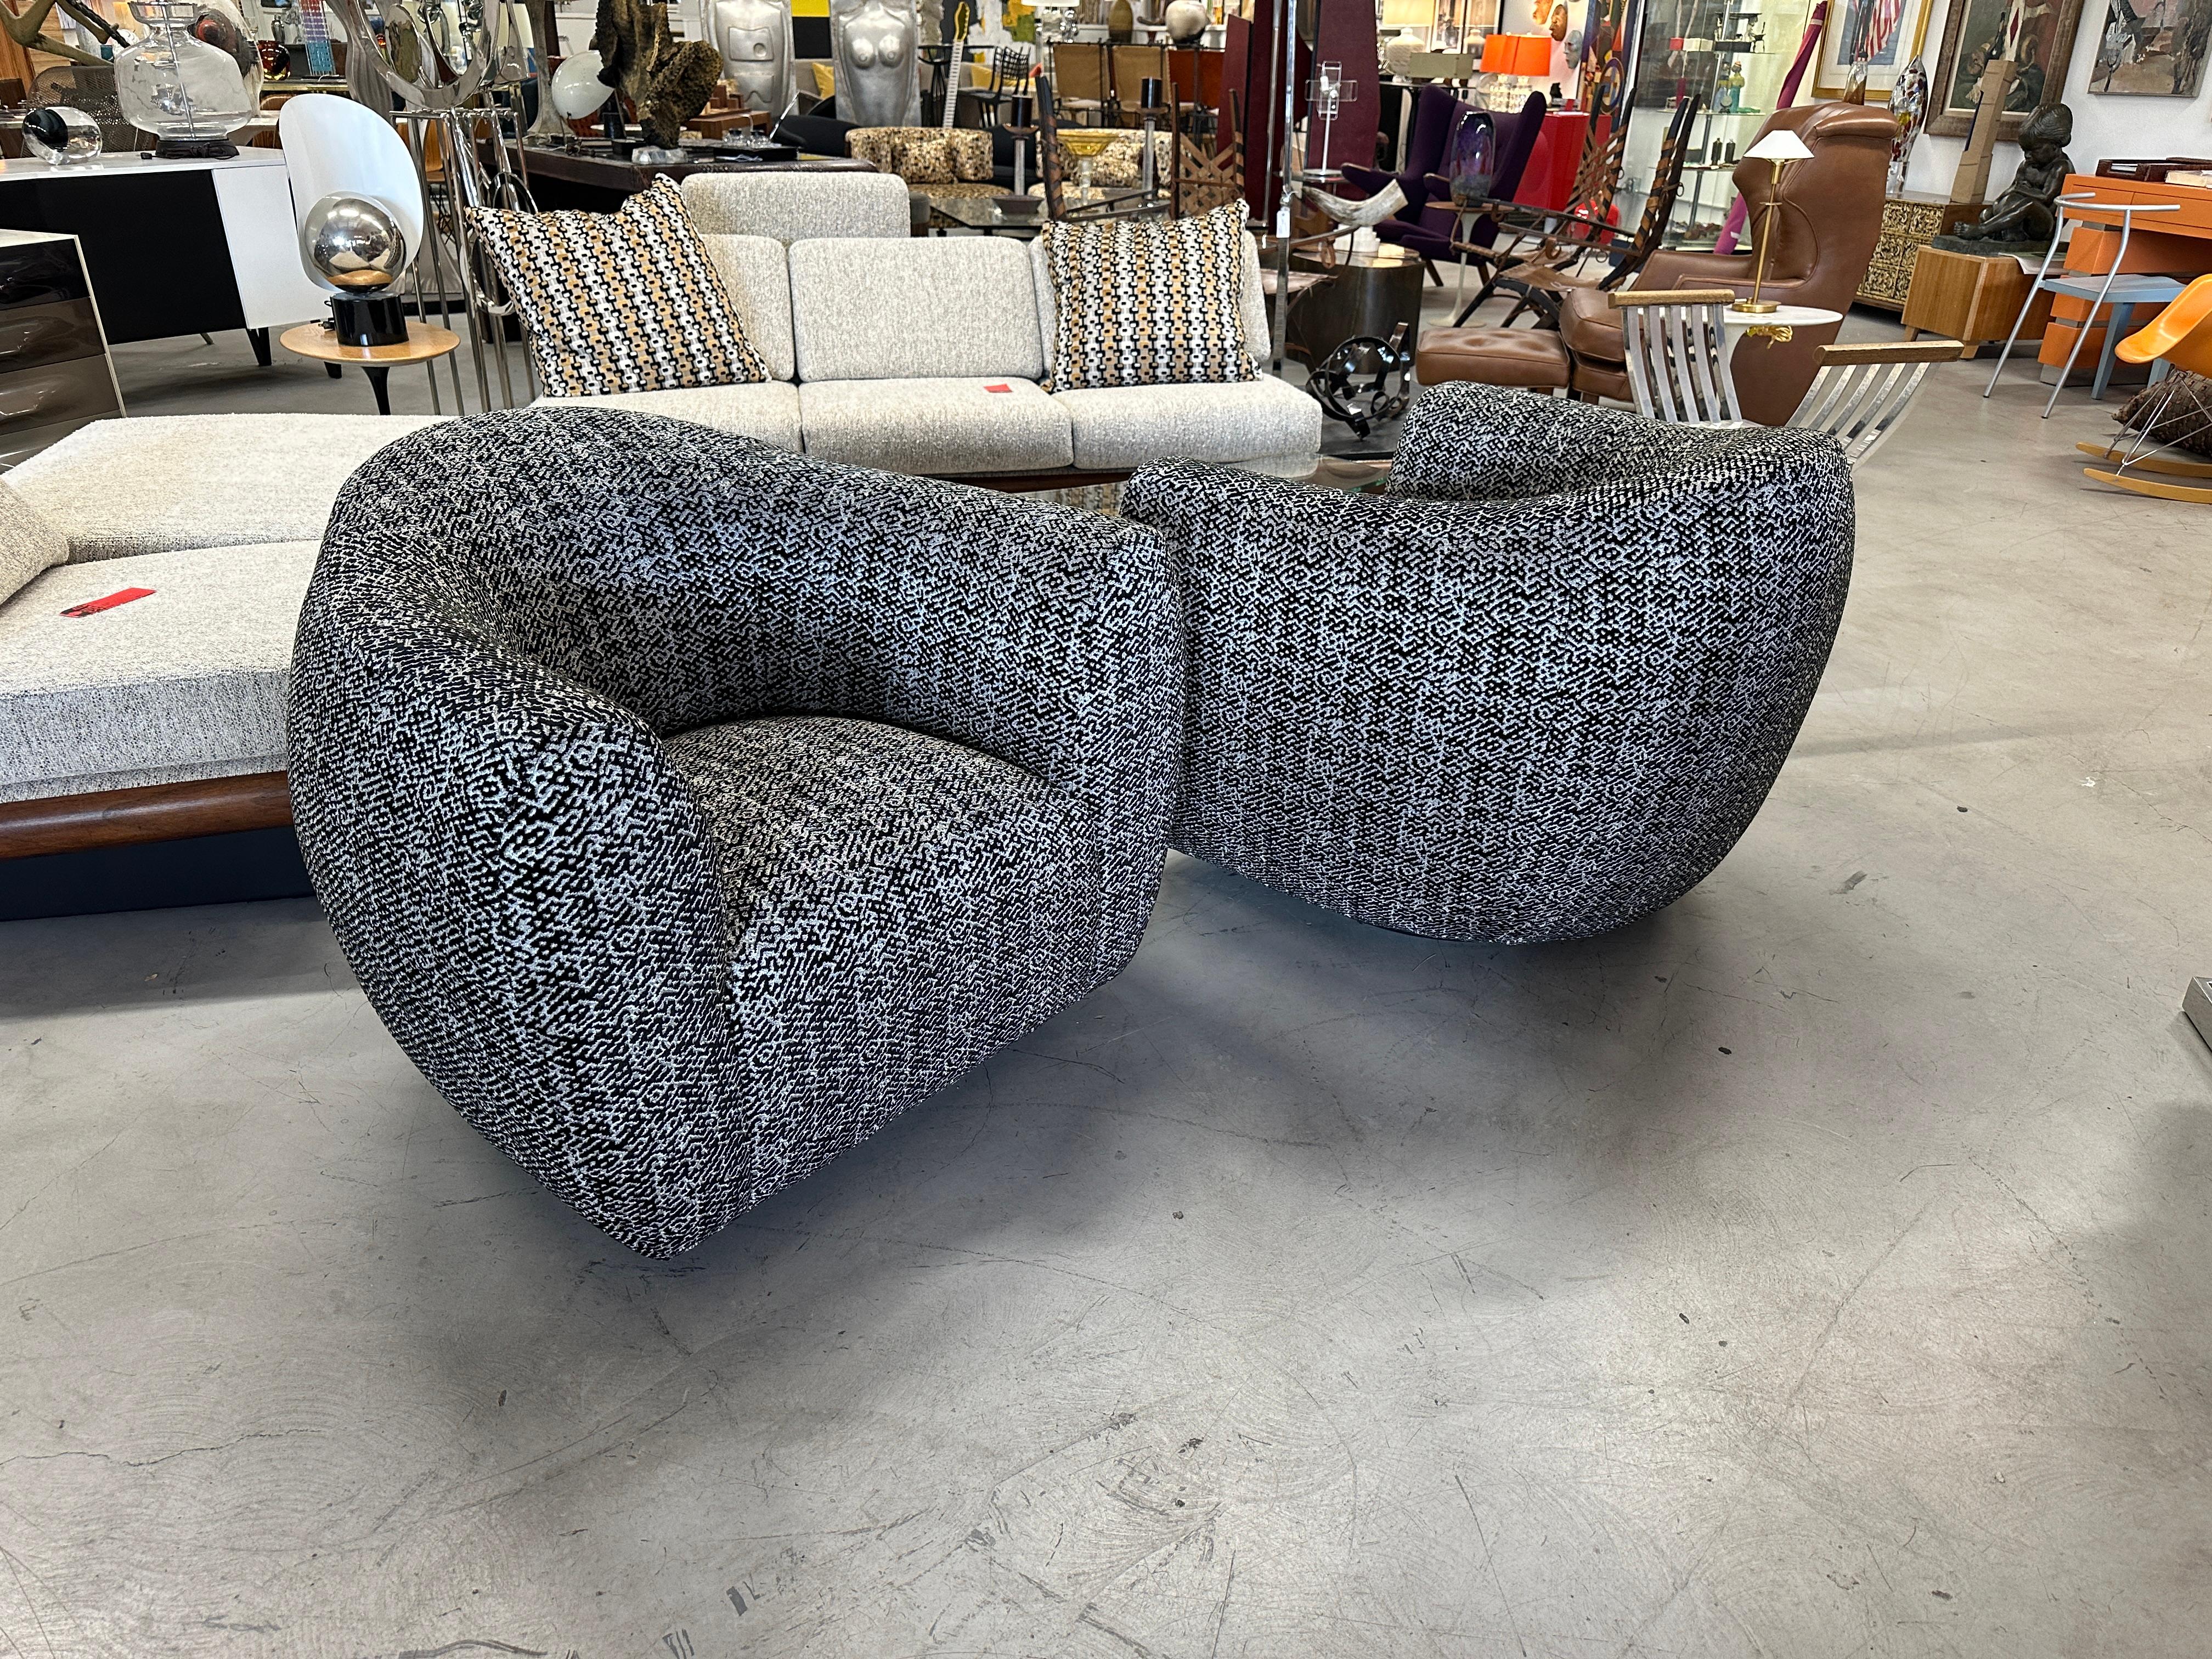 Late 20th Century 1980’s Vintage Oversized Swivel Chairs Reupholstered in Pollack/Weitzner Fabric For Sale